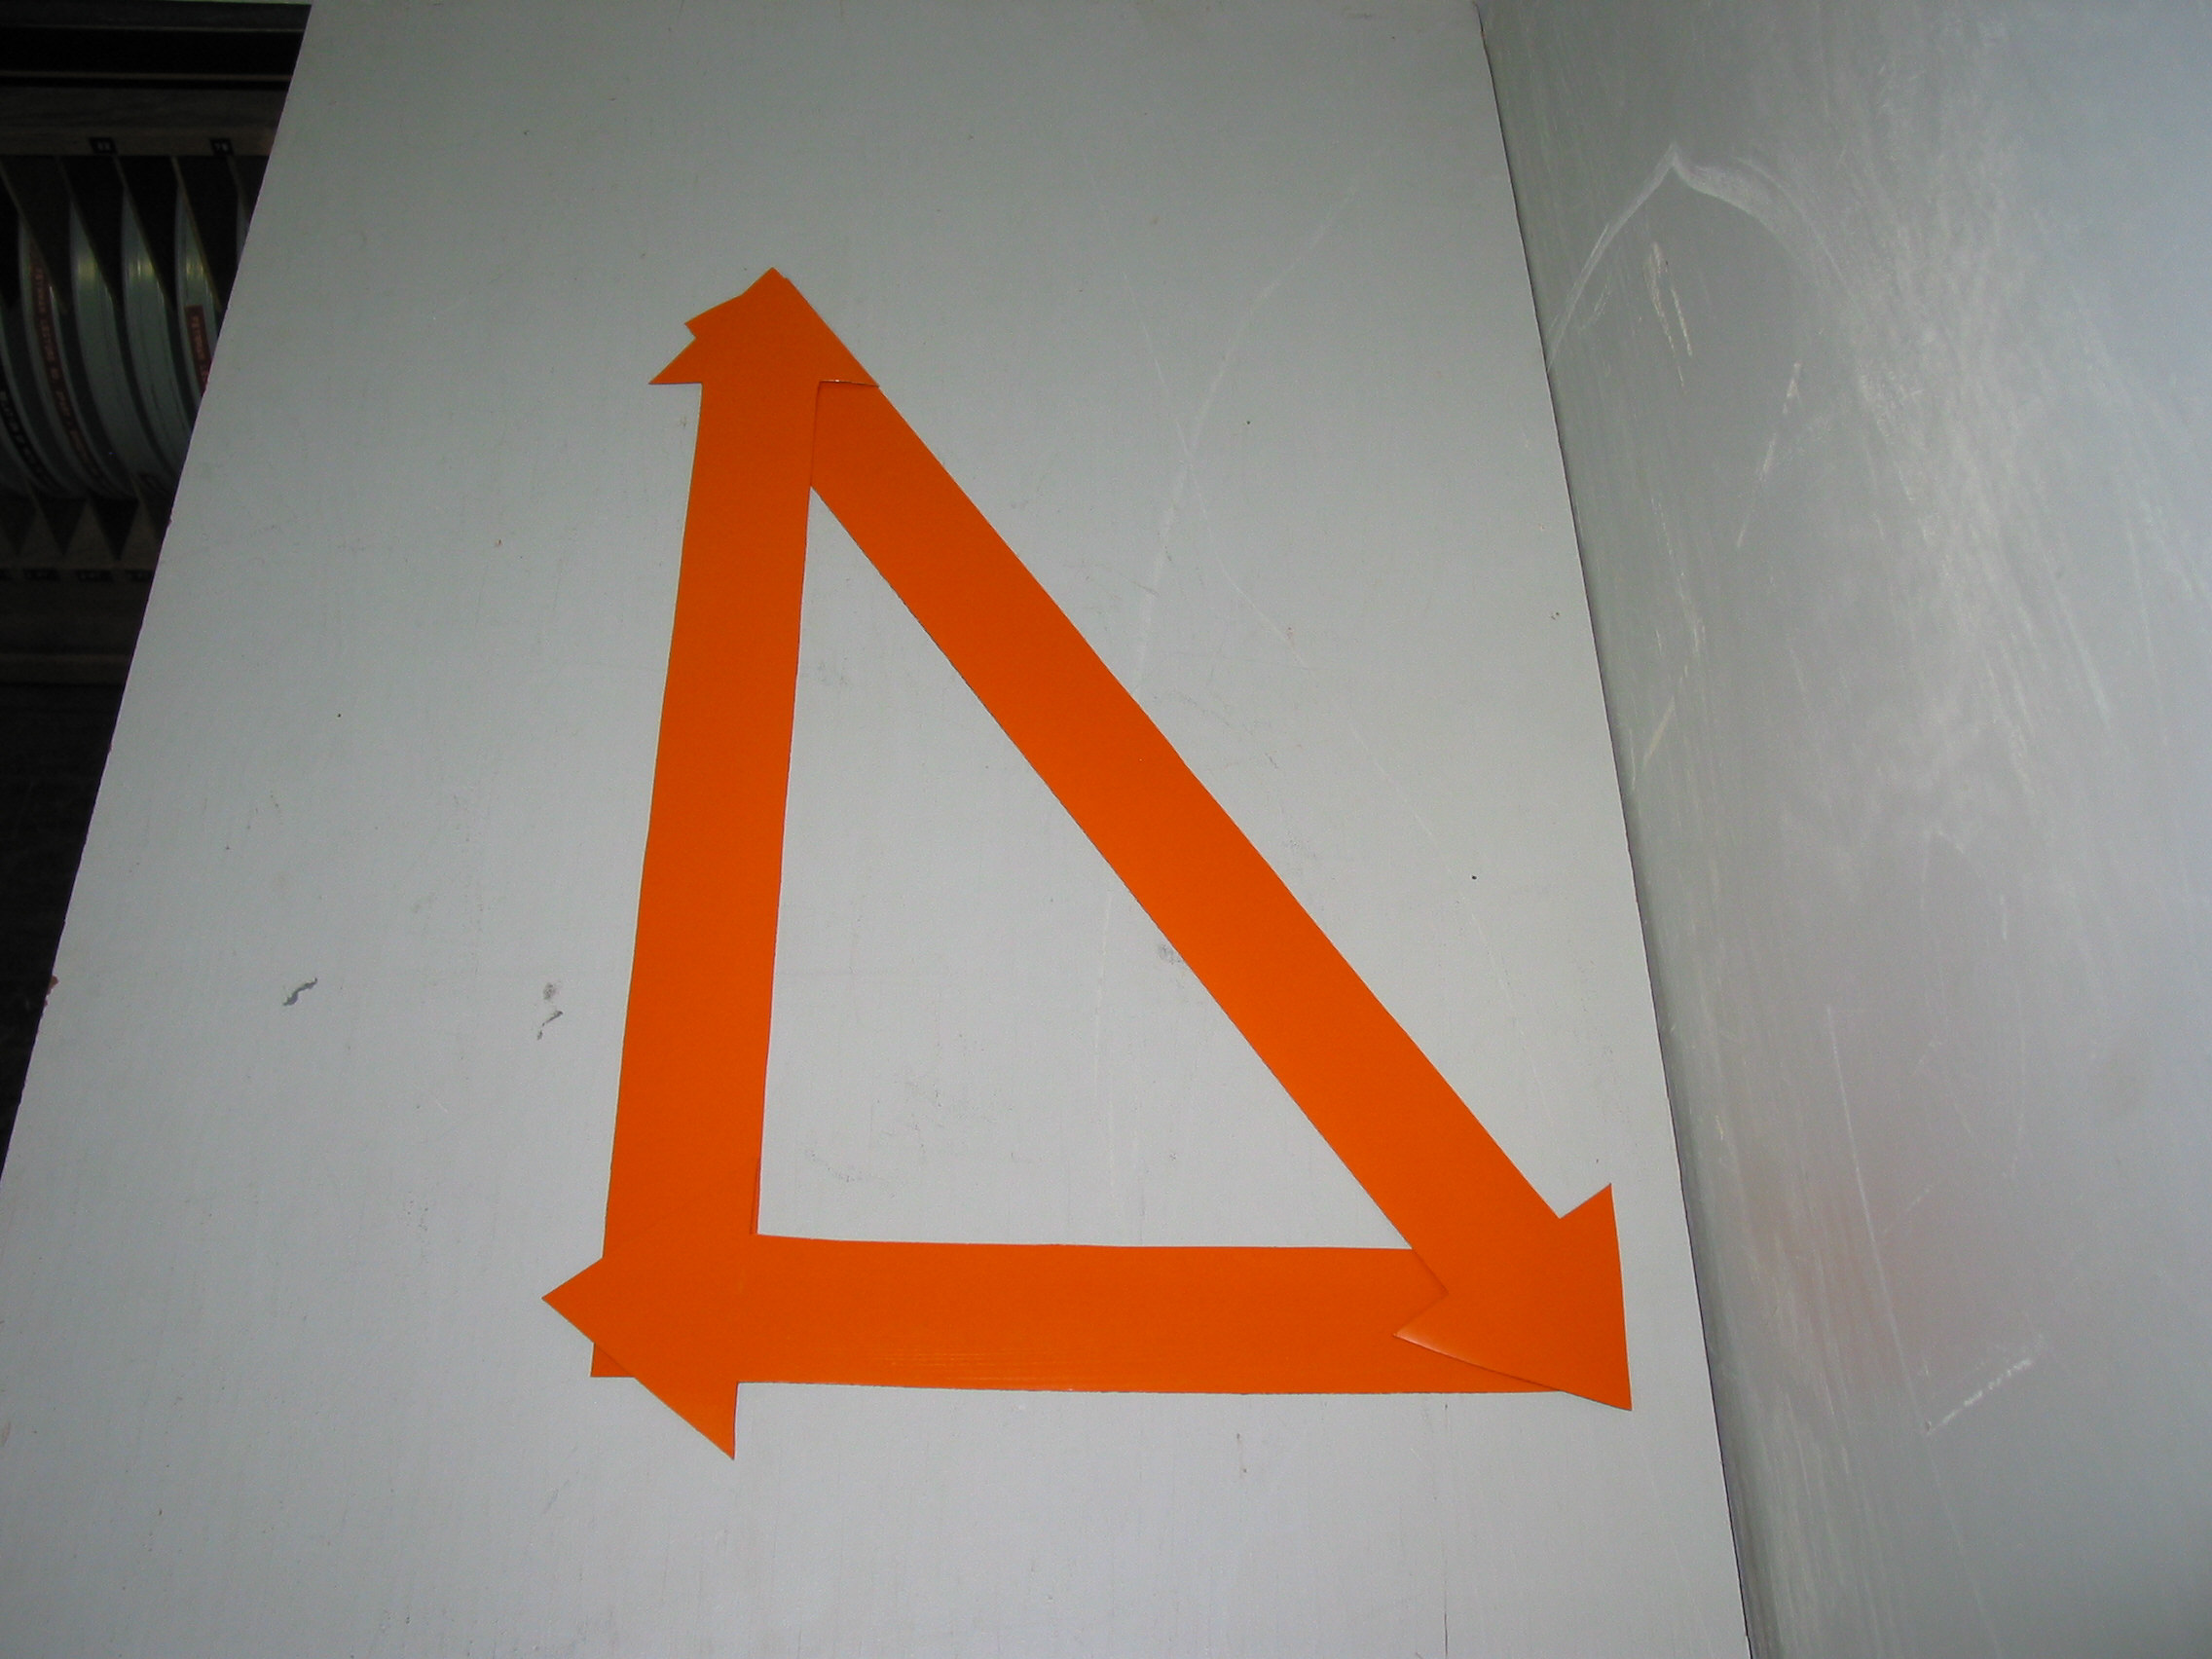 Picture of magnetic strips joind together in a triangle